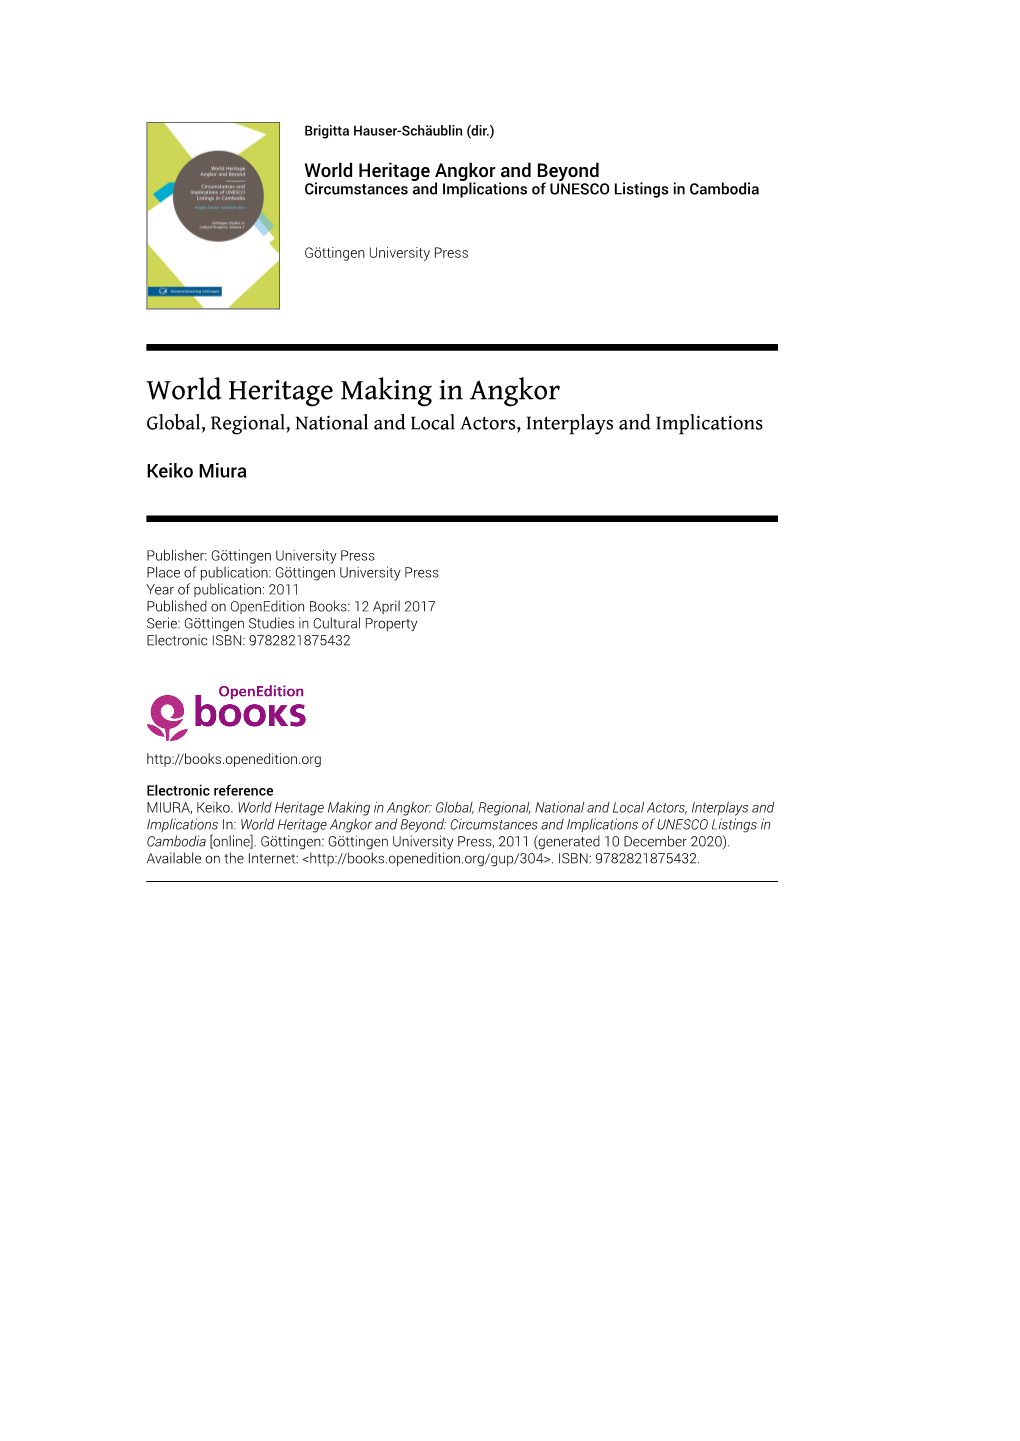 World Heritage Making in Angkor Global, Regional, National and Local Actors, Interplays and Implications